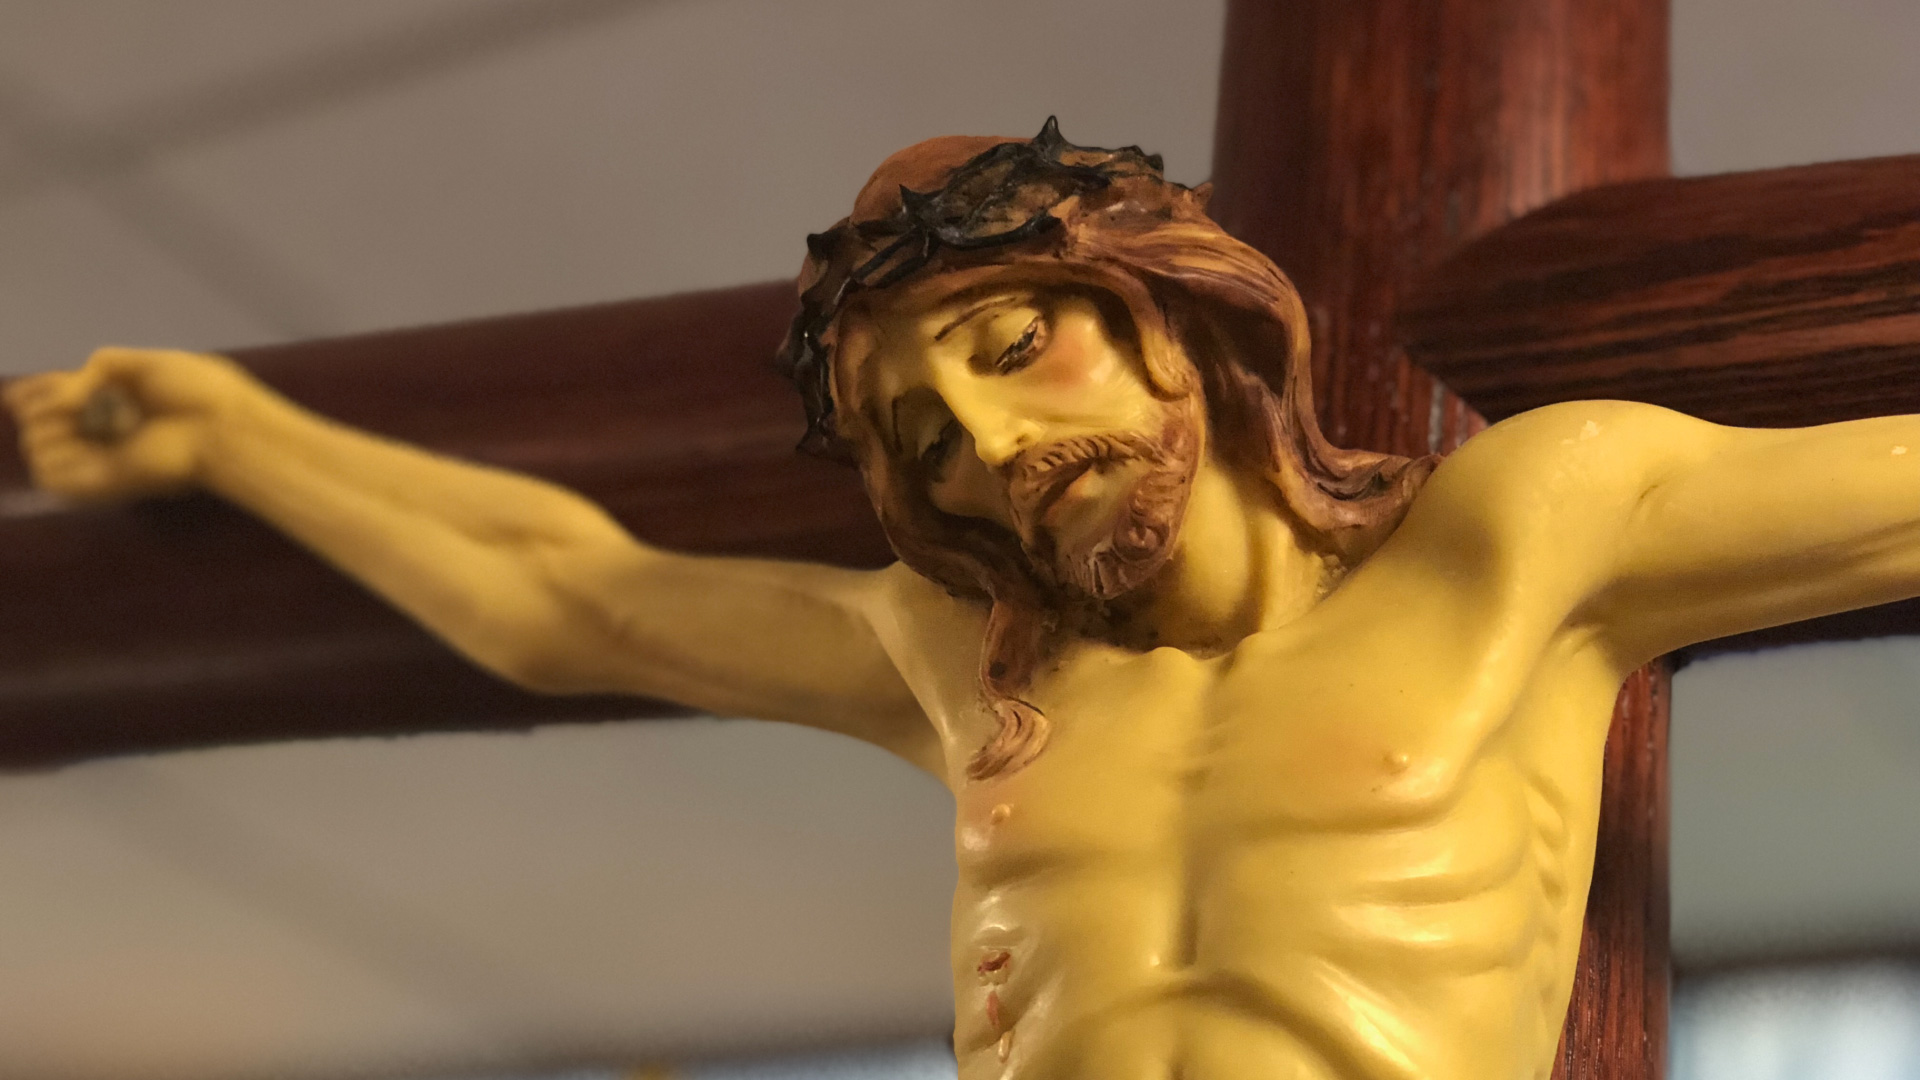 Ways To Keep The Reformation All About Jesus On The Cross